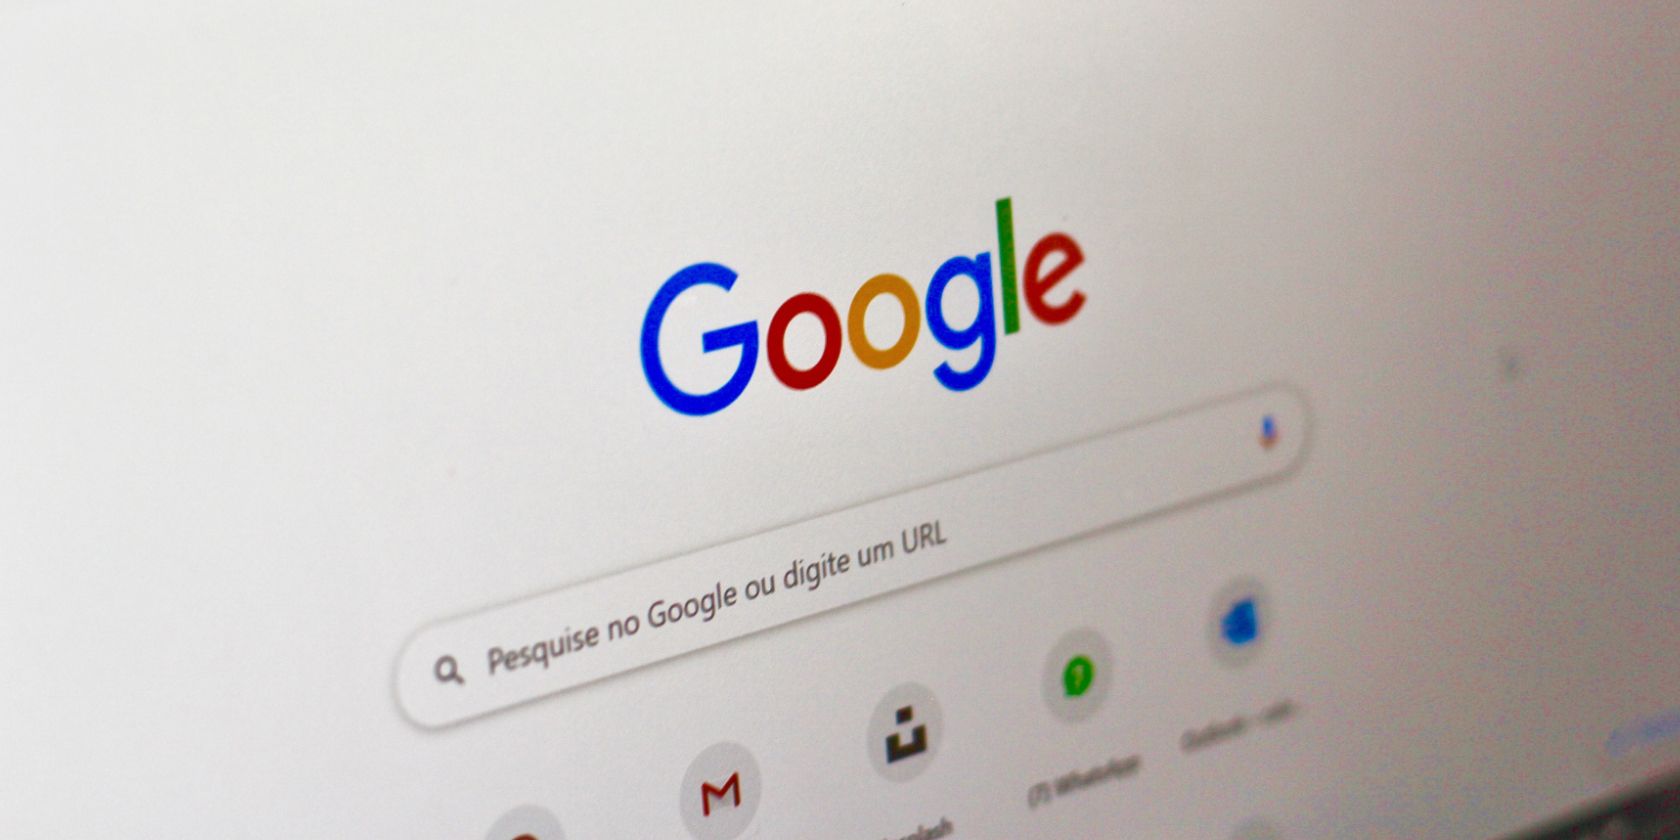 10 Tips And Tricks To Use Google Search More Effectively